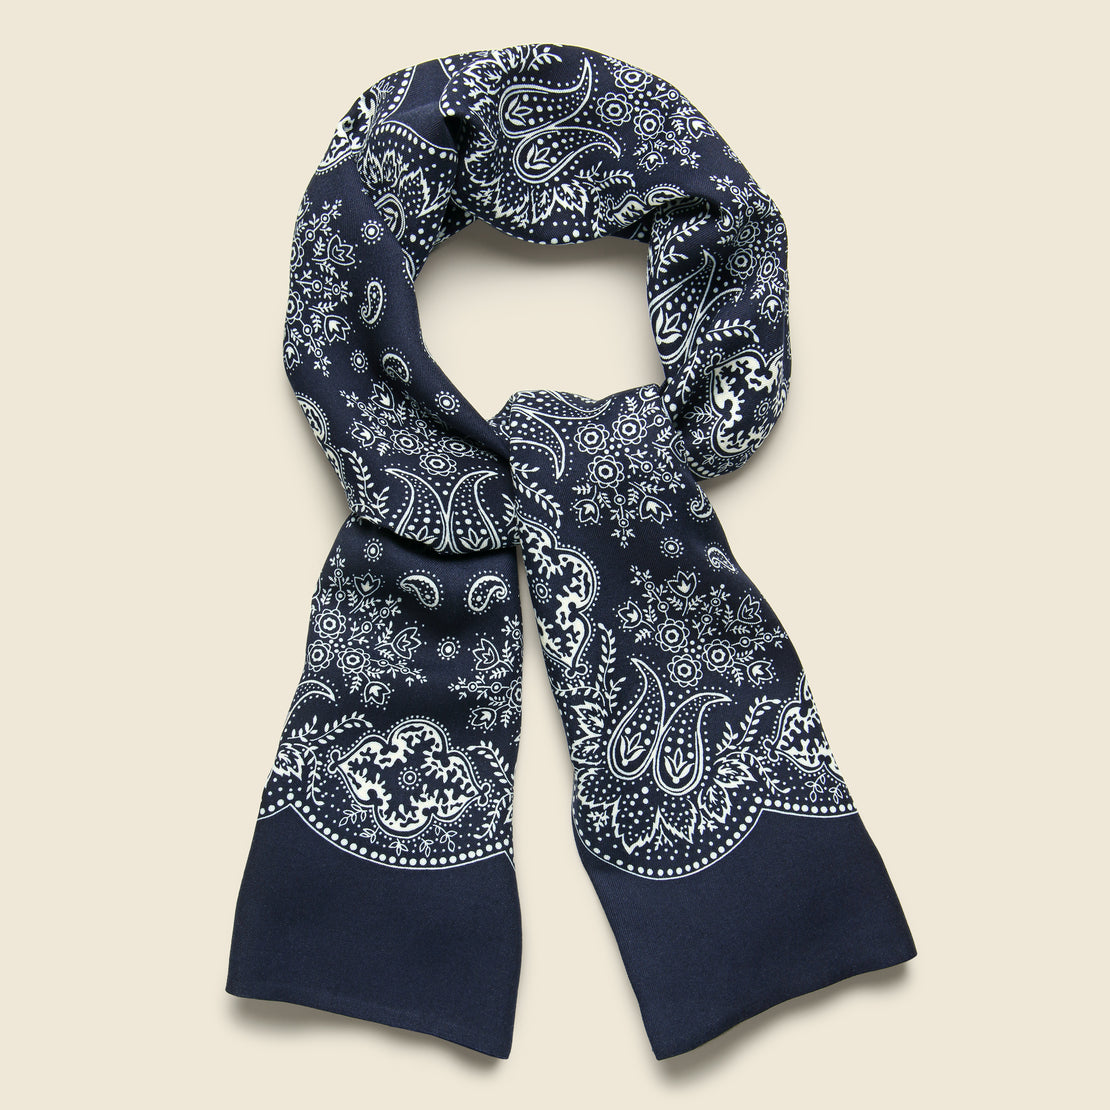 Mayfair Scarf - Navy/Cream - RRL - STAG Provisions - Accessories - Bandanas